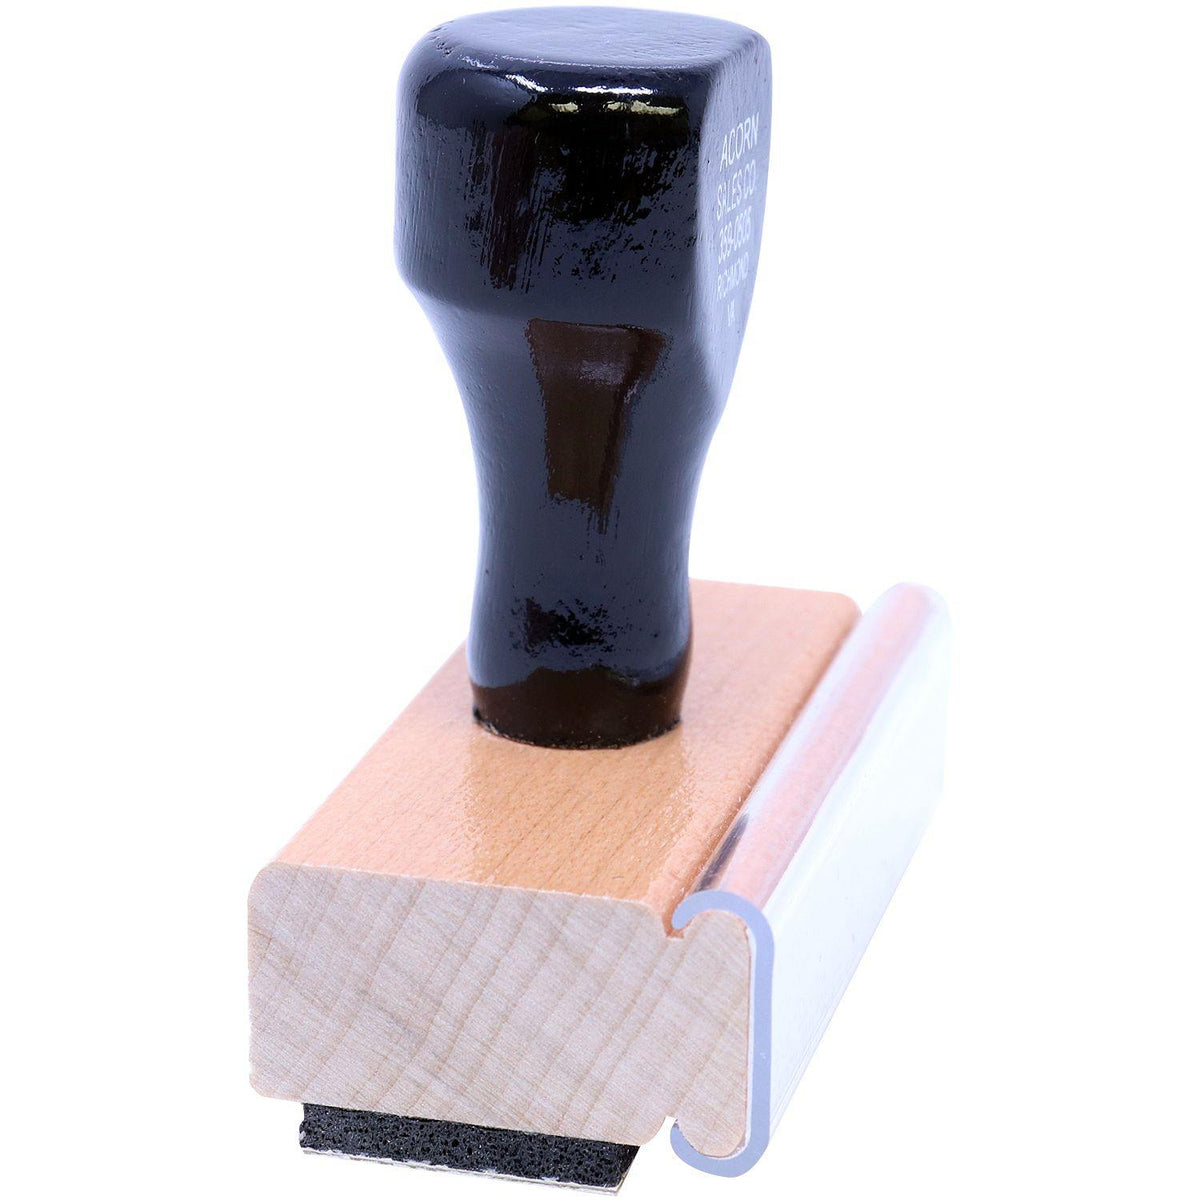 Side View of Special Handling Rubber Stamp at an Angle